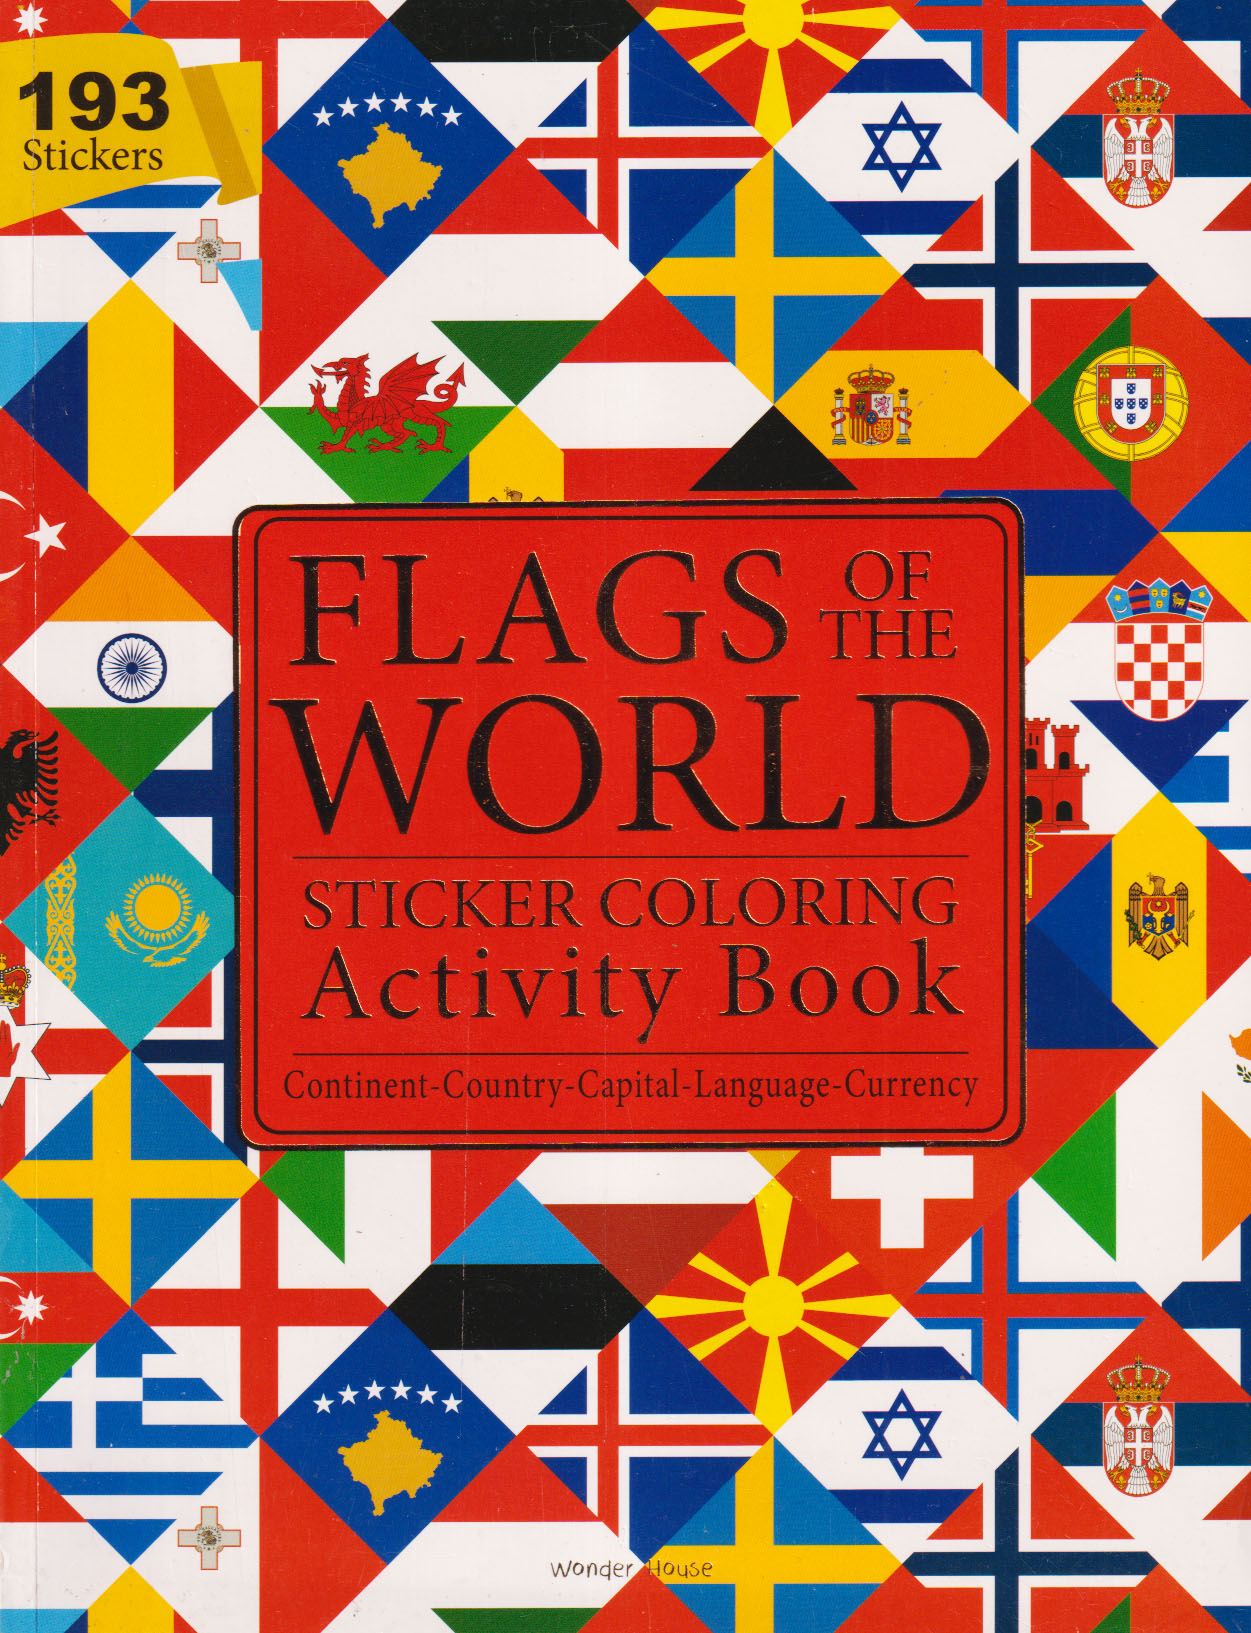 Flags of the World - Sticker Coloring Activity Book (পেপারব্যাক)